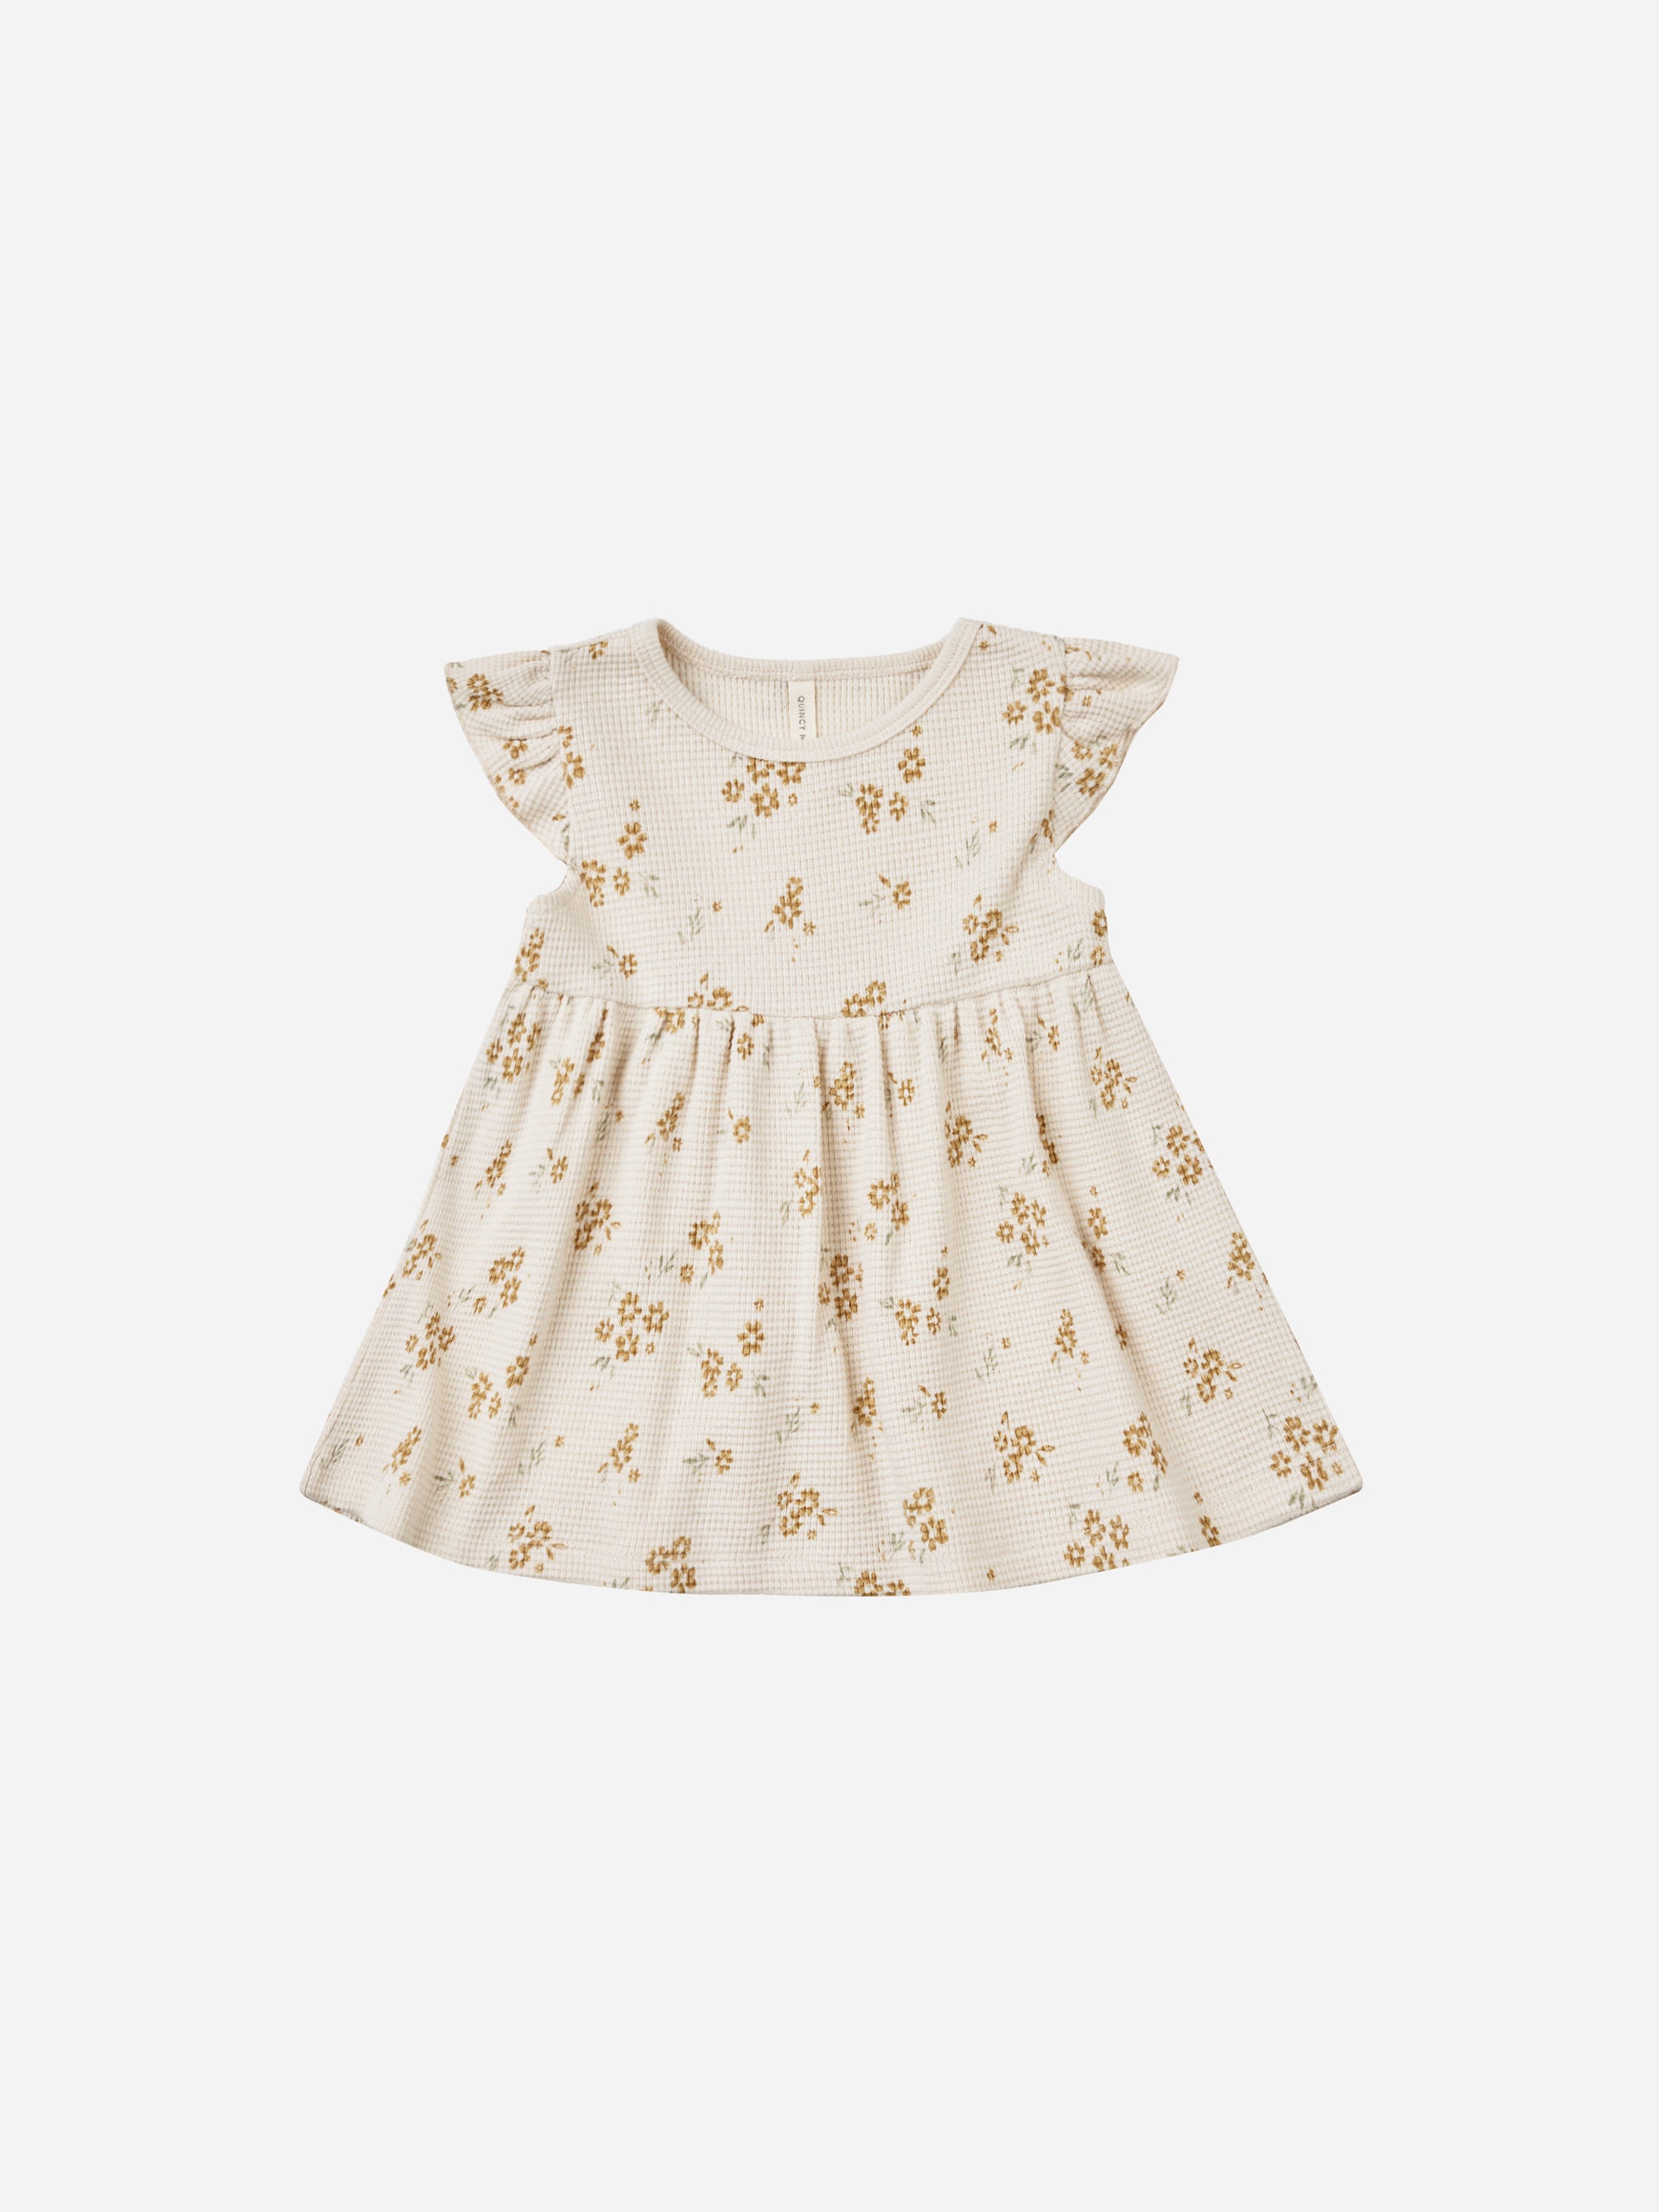 Flutter Sleeve Dress || Honey Flower - Rylee + Cru | Kids Clothes | Trendy Baby Clothes | Modern Infant Outfits |